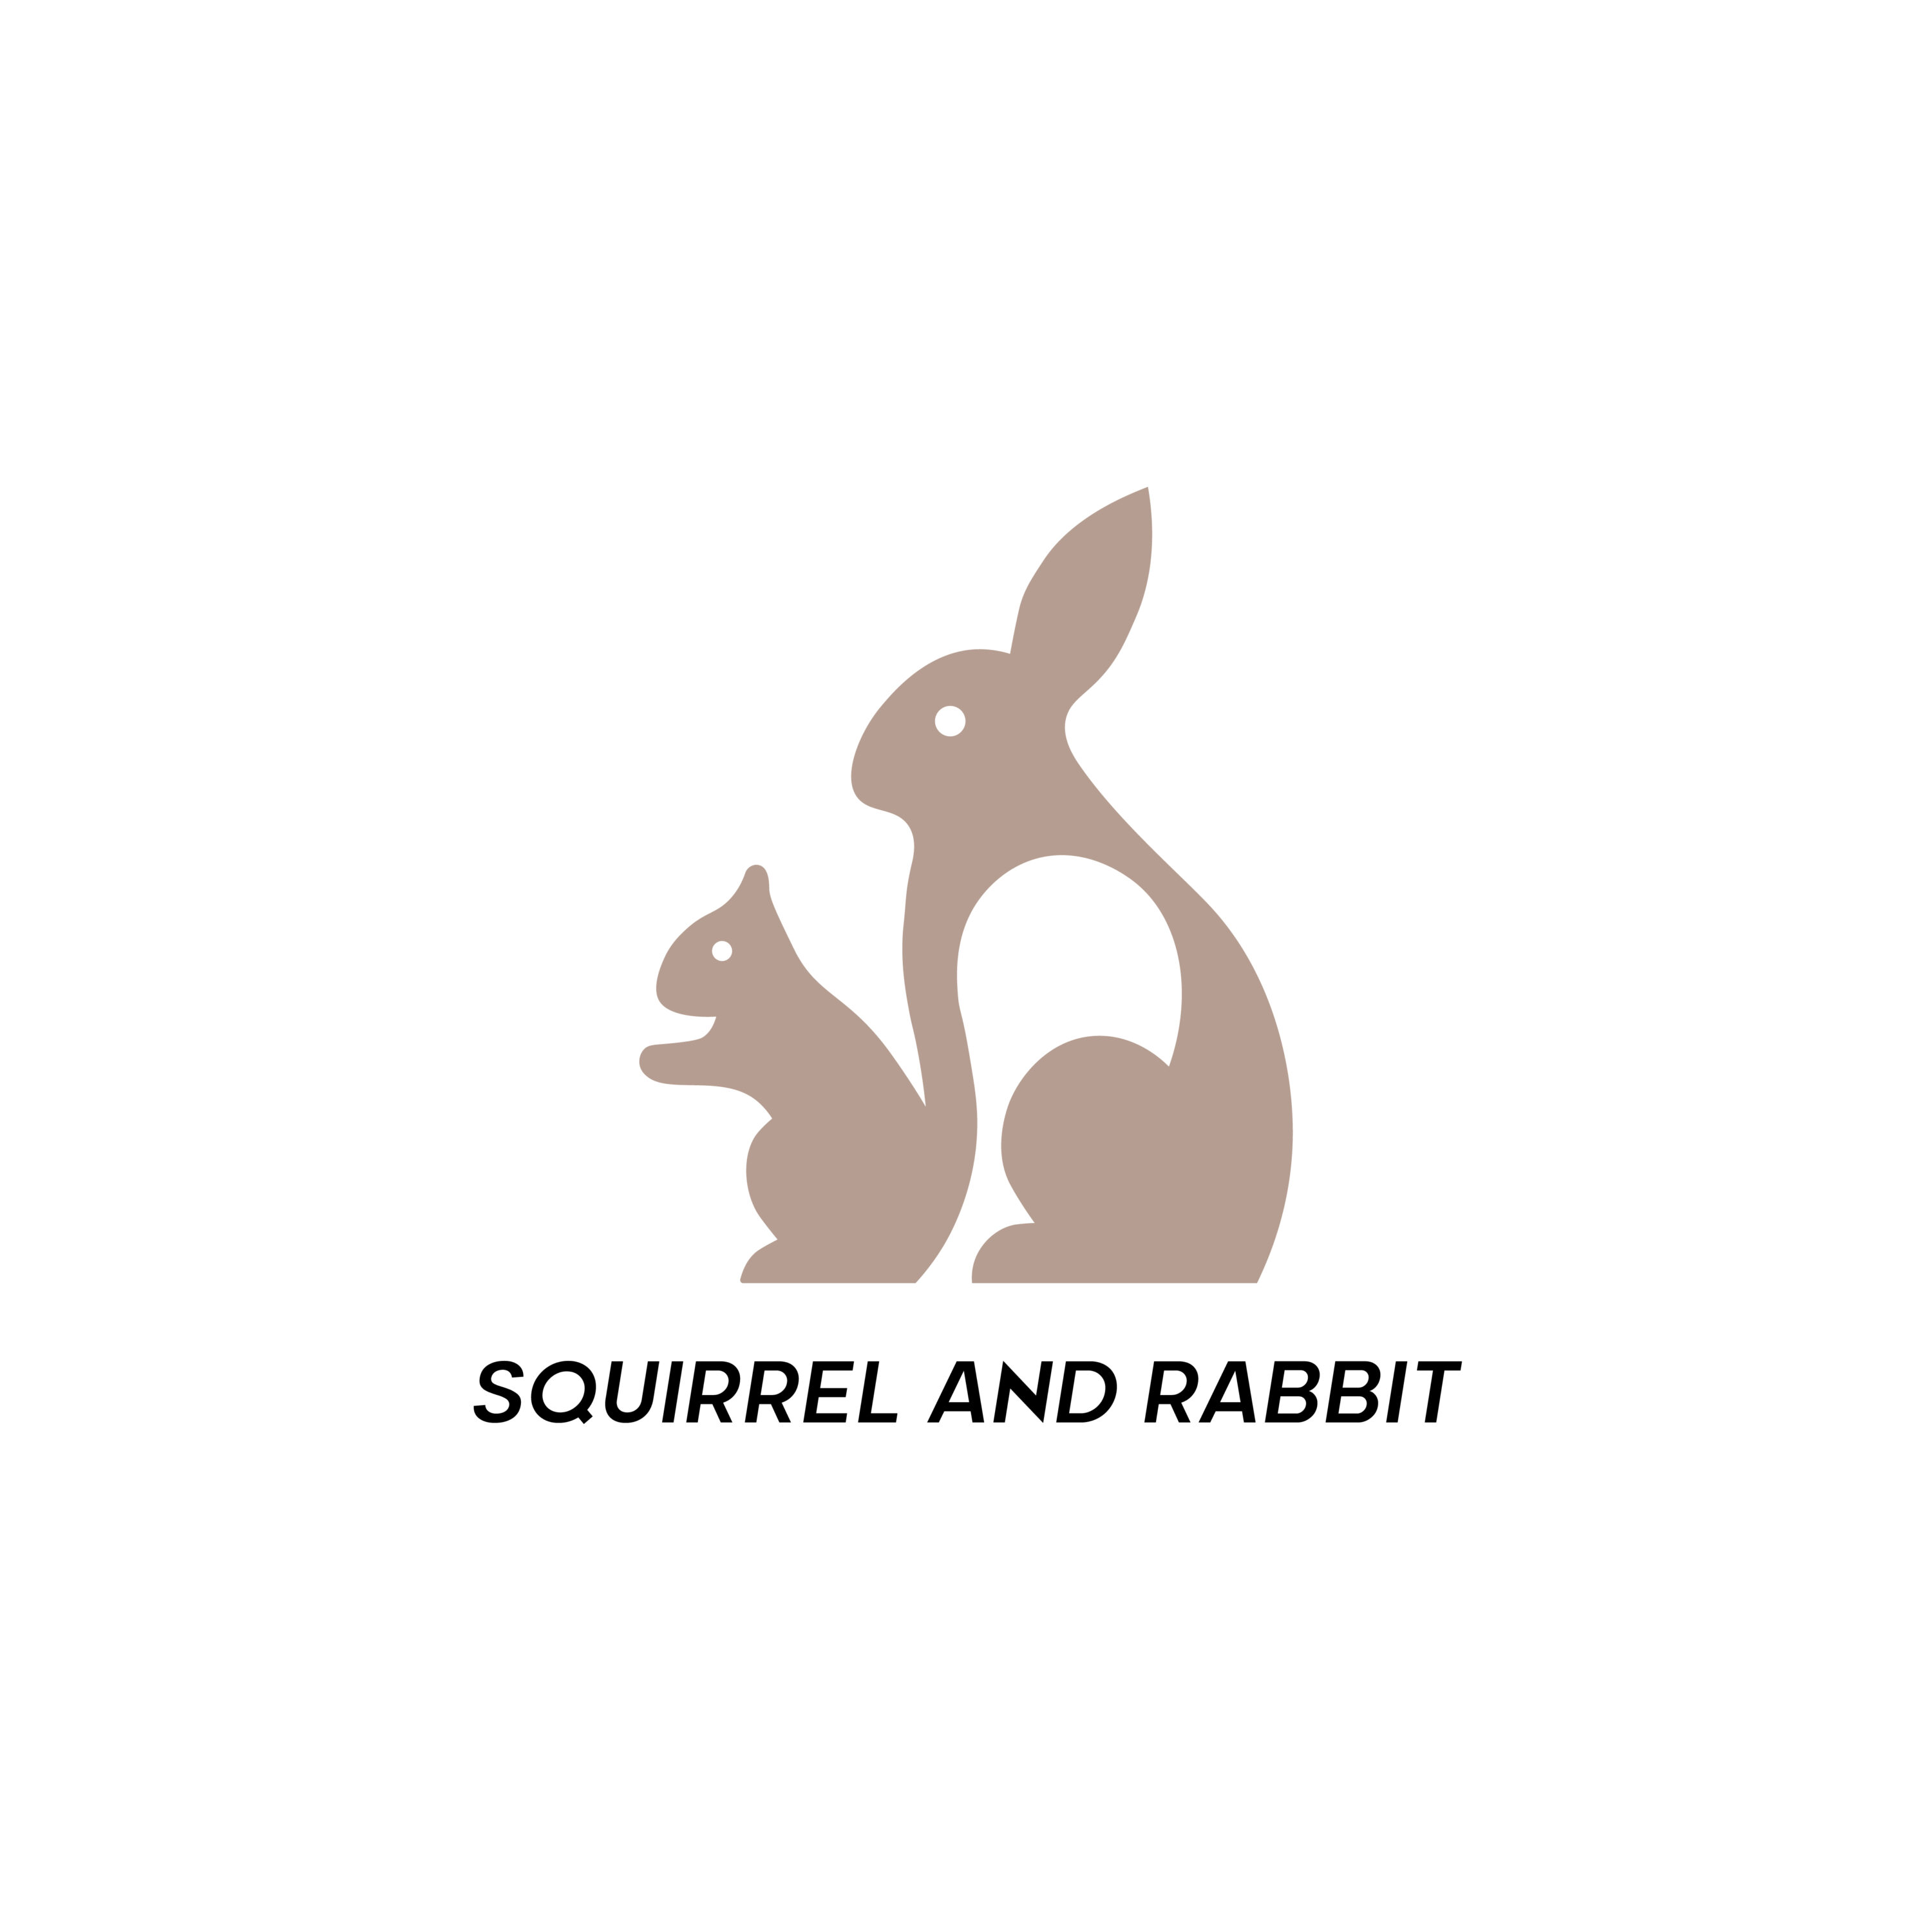 Squirrel and Rabbit Logo main cover.